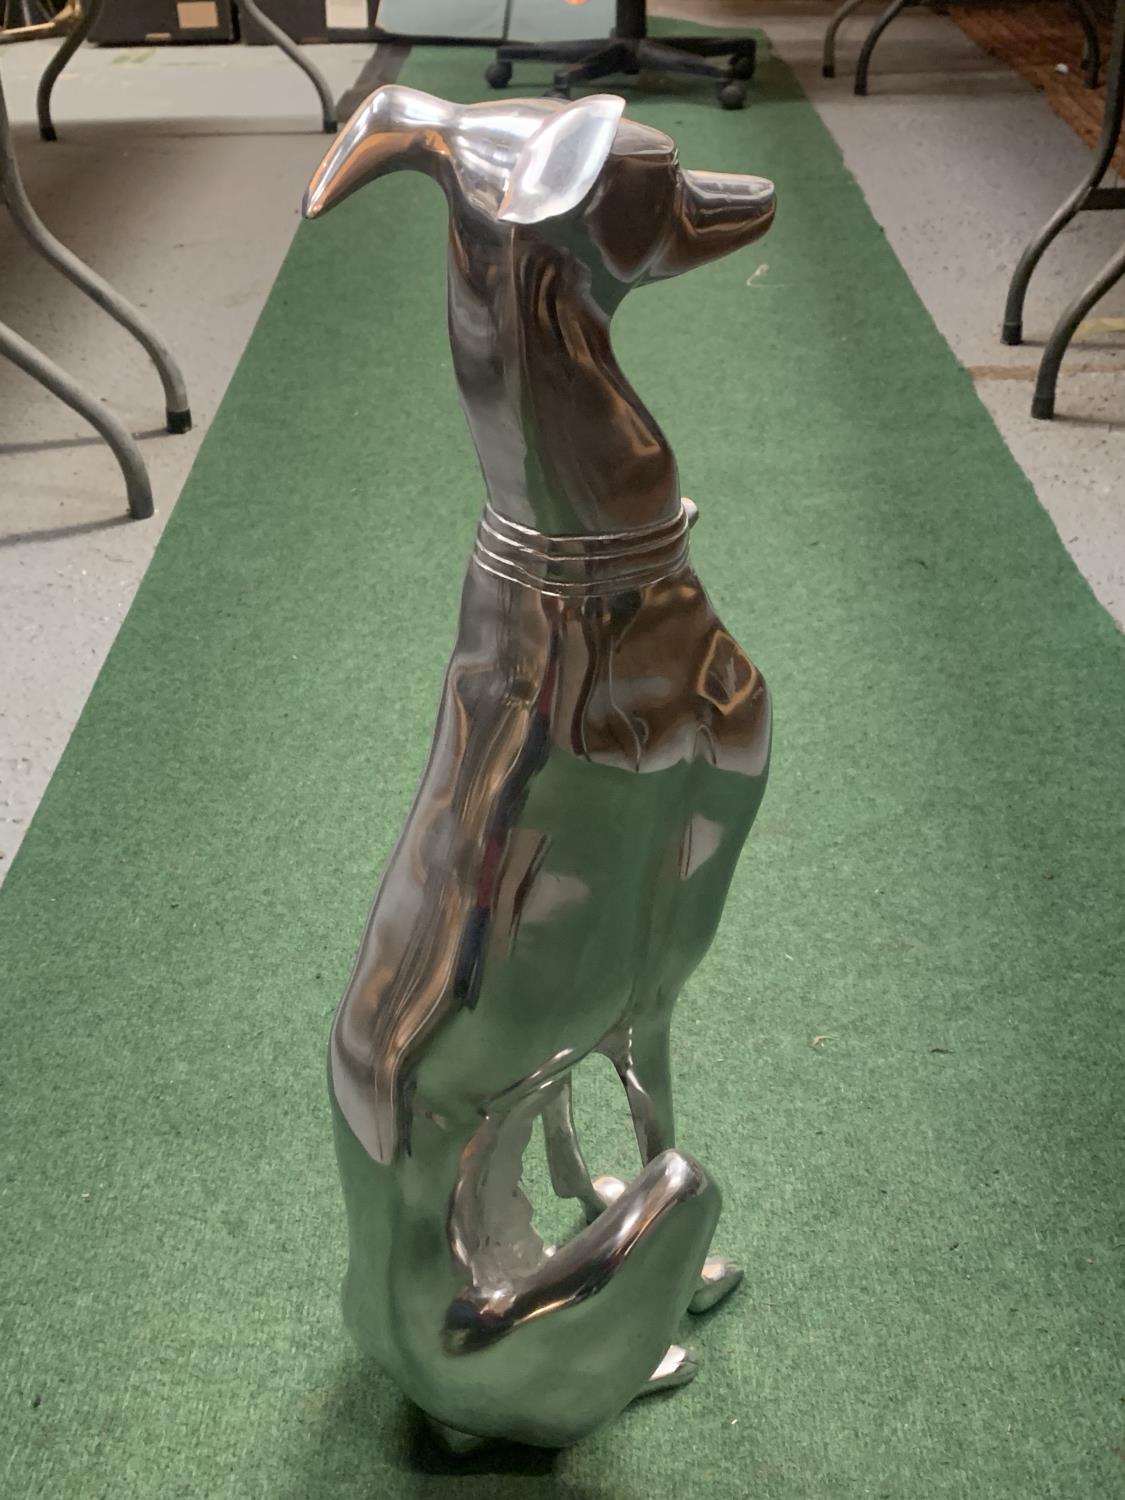 A LARGE CHROME GREYHOUND IN A SITTING POSITION 70CM HIGH - Image 3 of 3